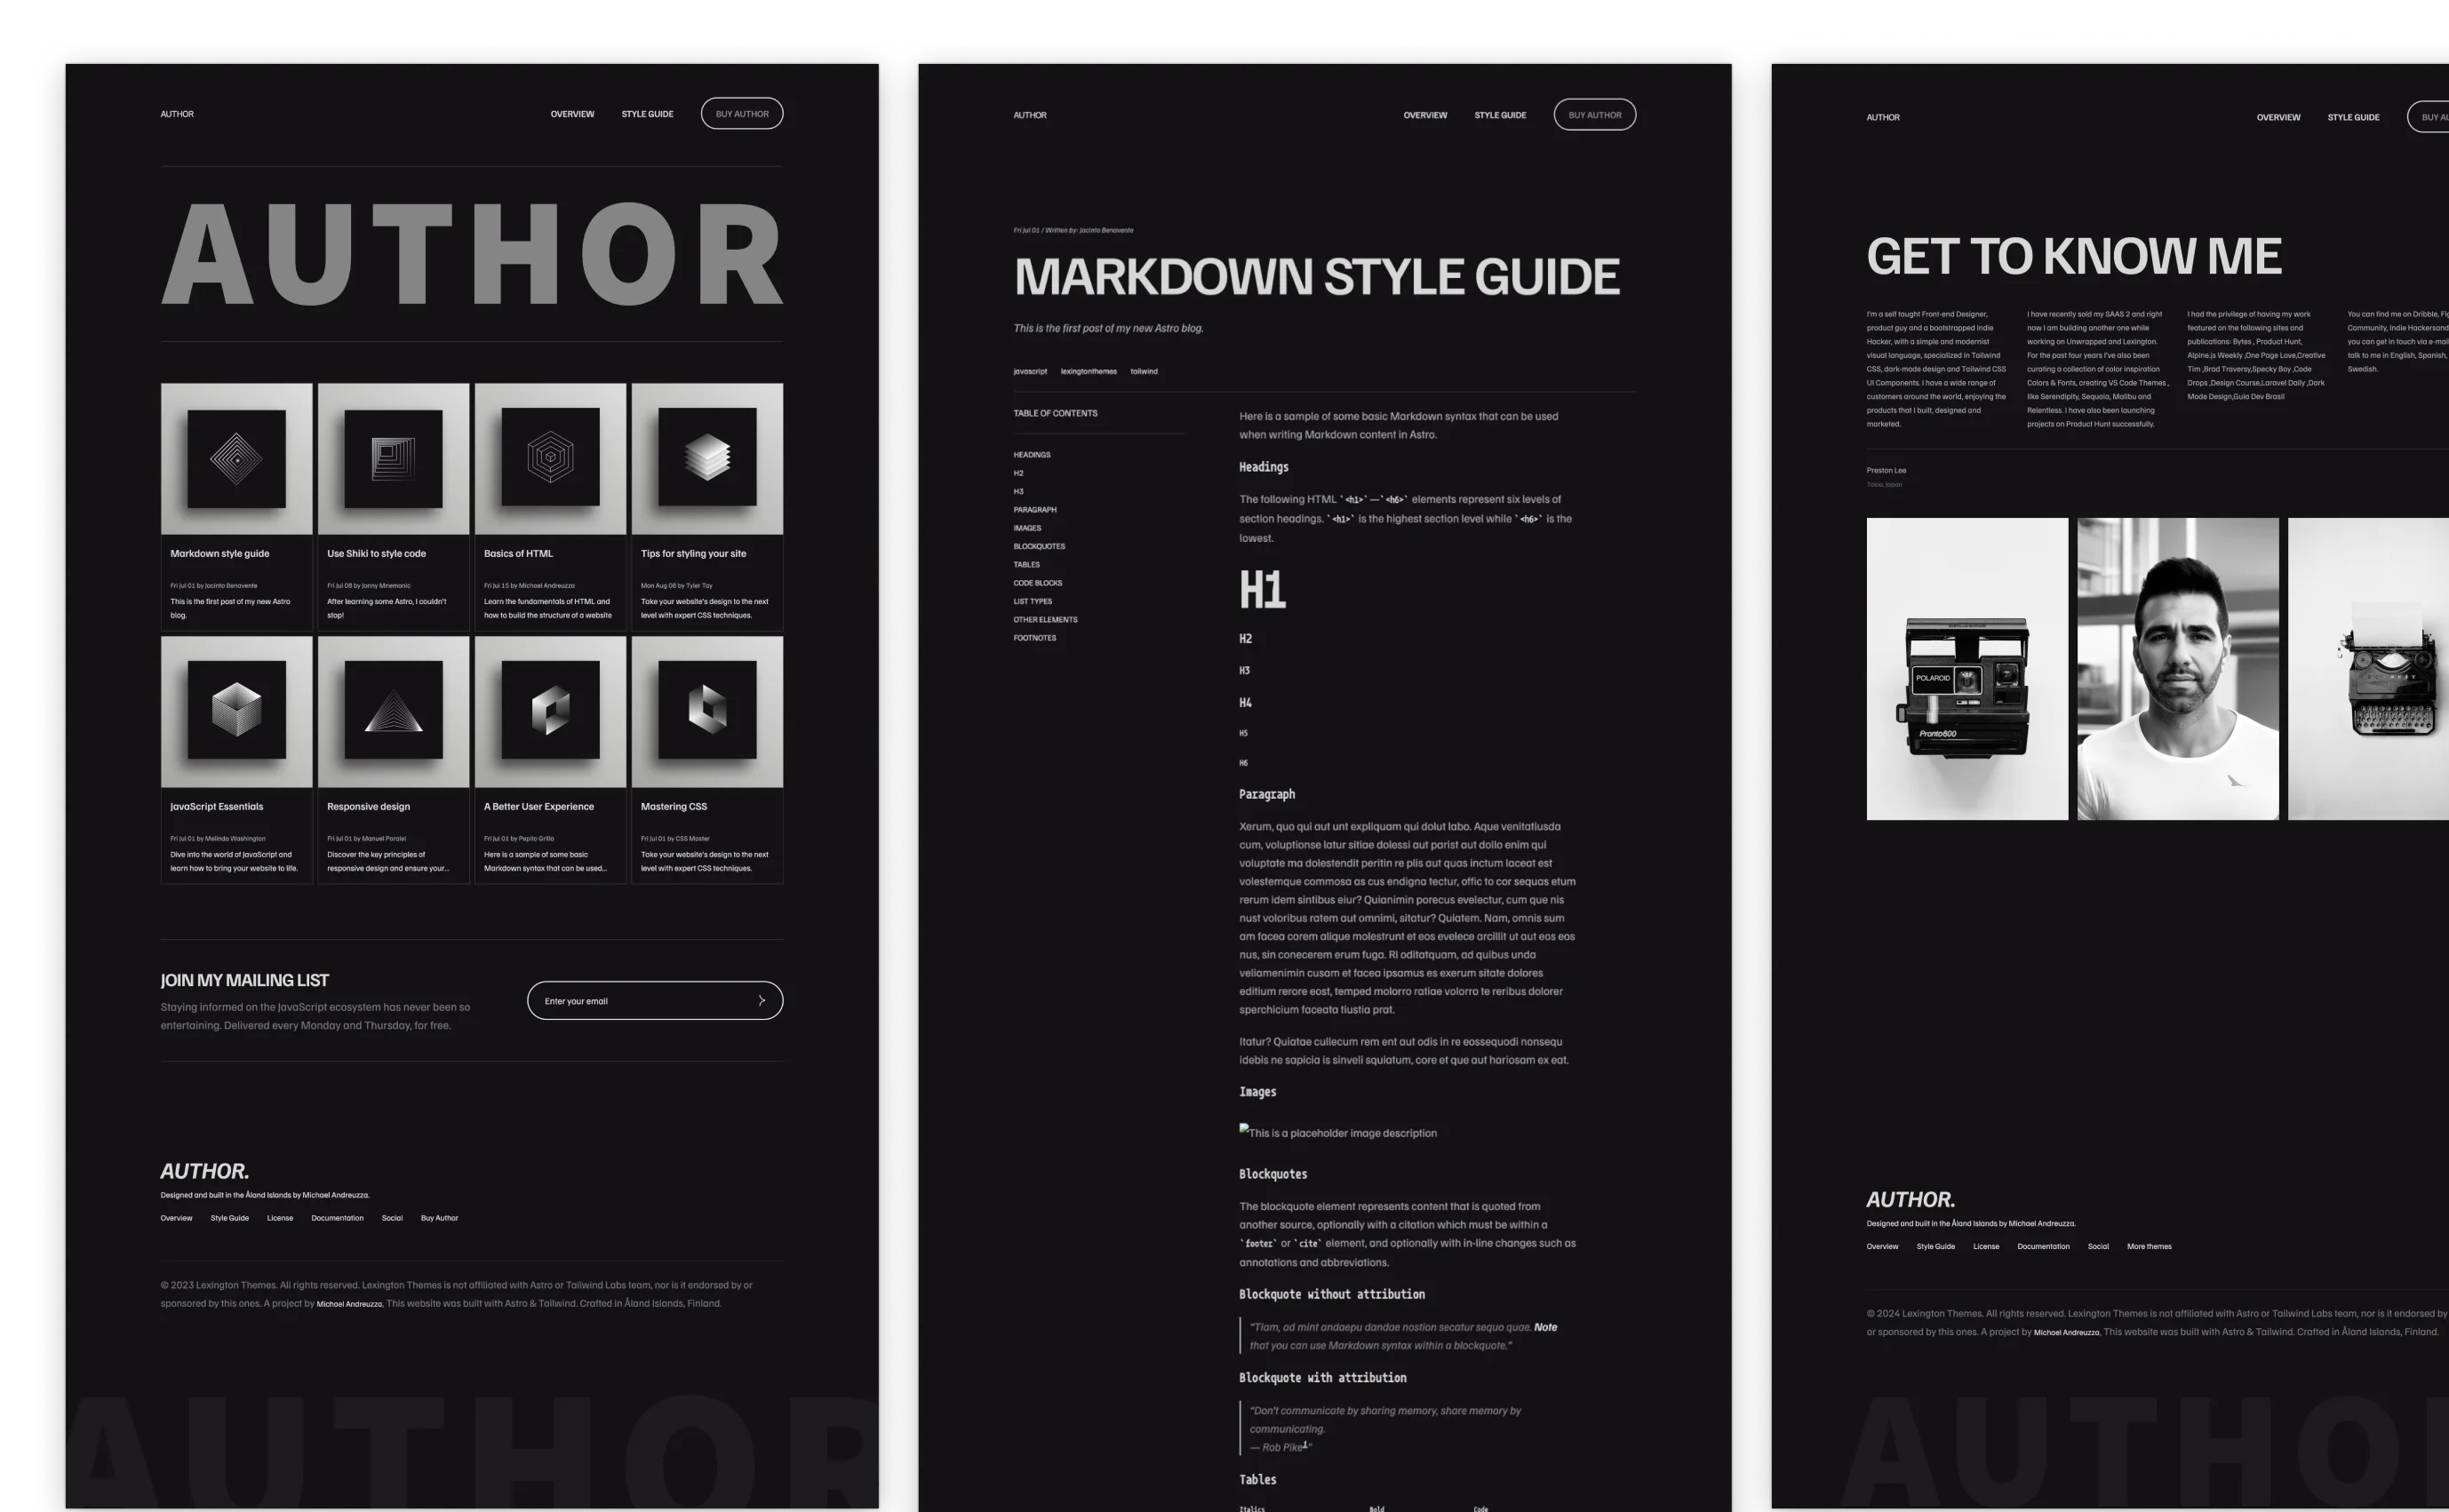 Author theme for blogging with a dark mode design, featuring markdown style guide, coding articles, and a 'Know Me' section with personal photos. The layout includes a grid of article previews with monochrome images and a call to action to join the mailing list.